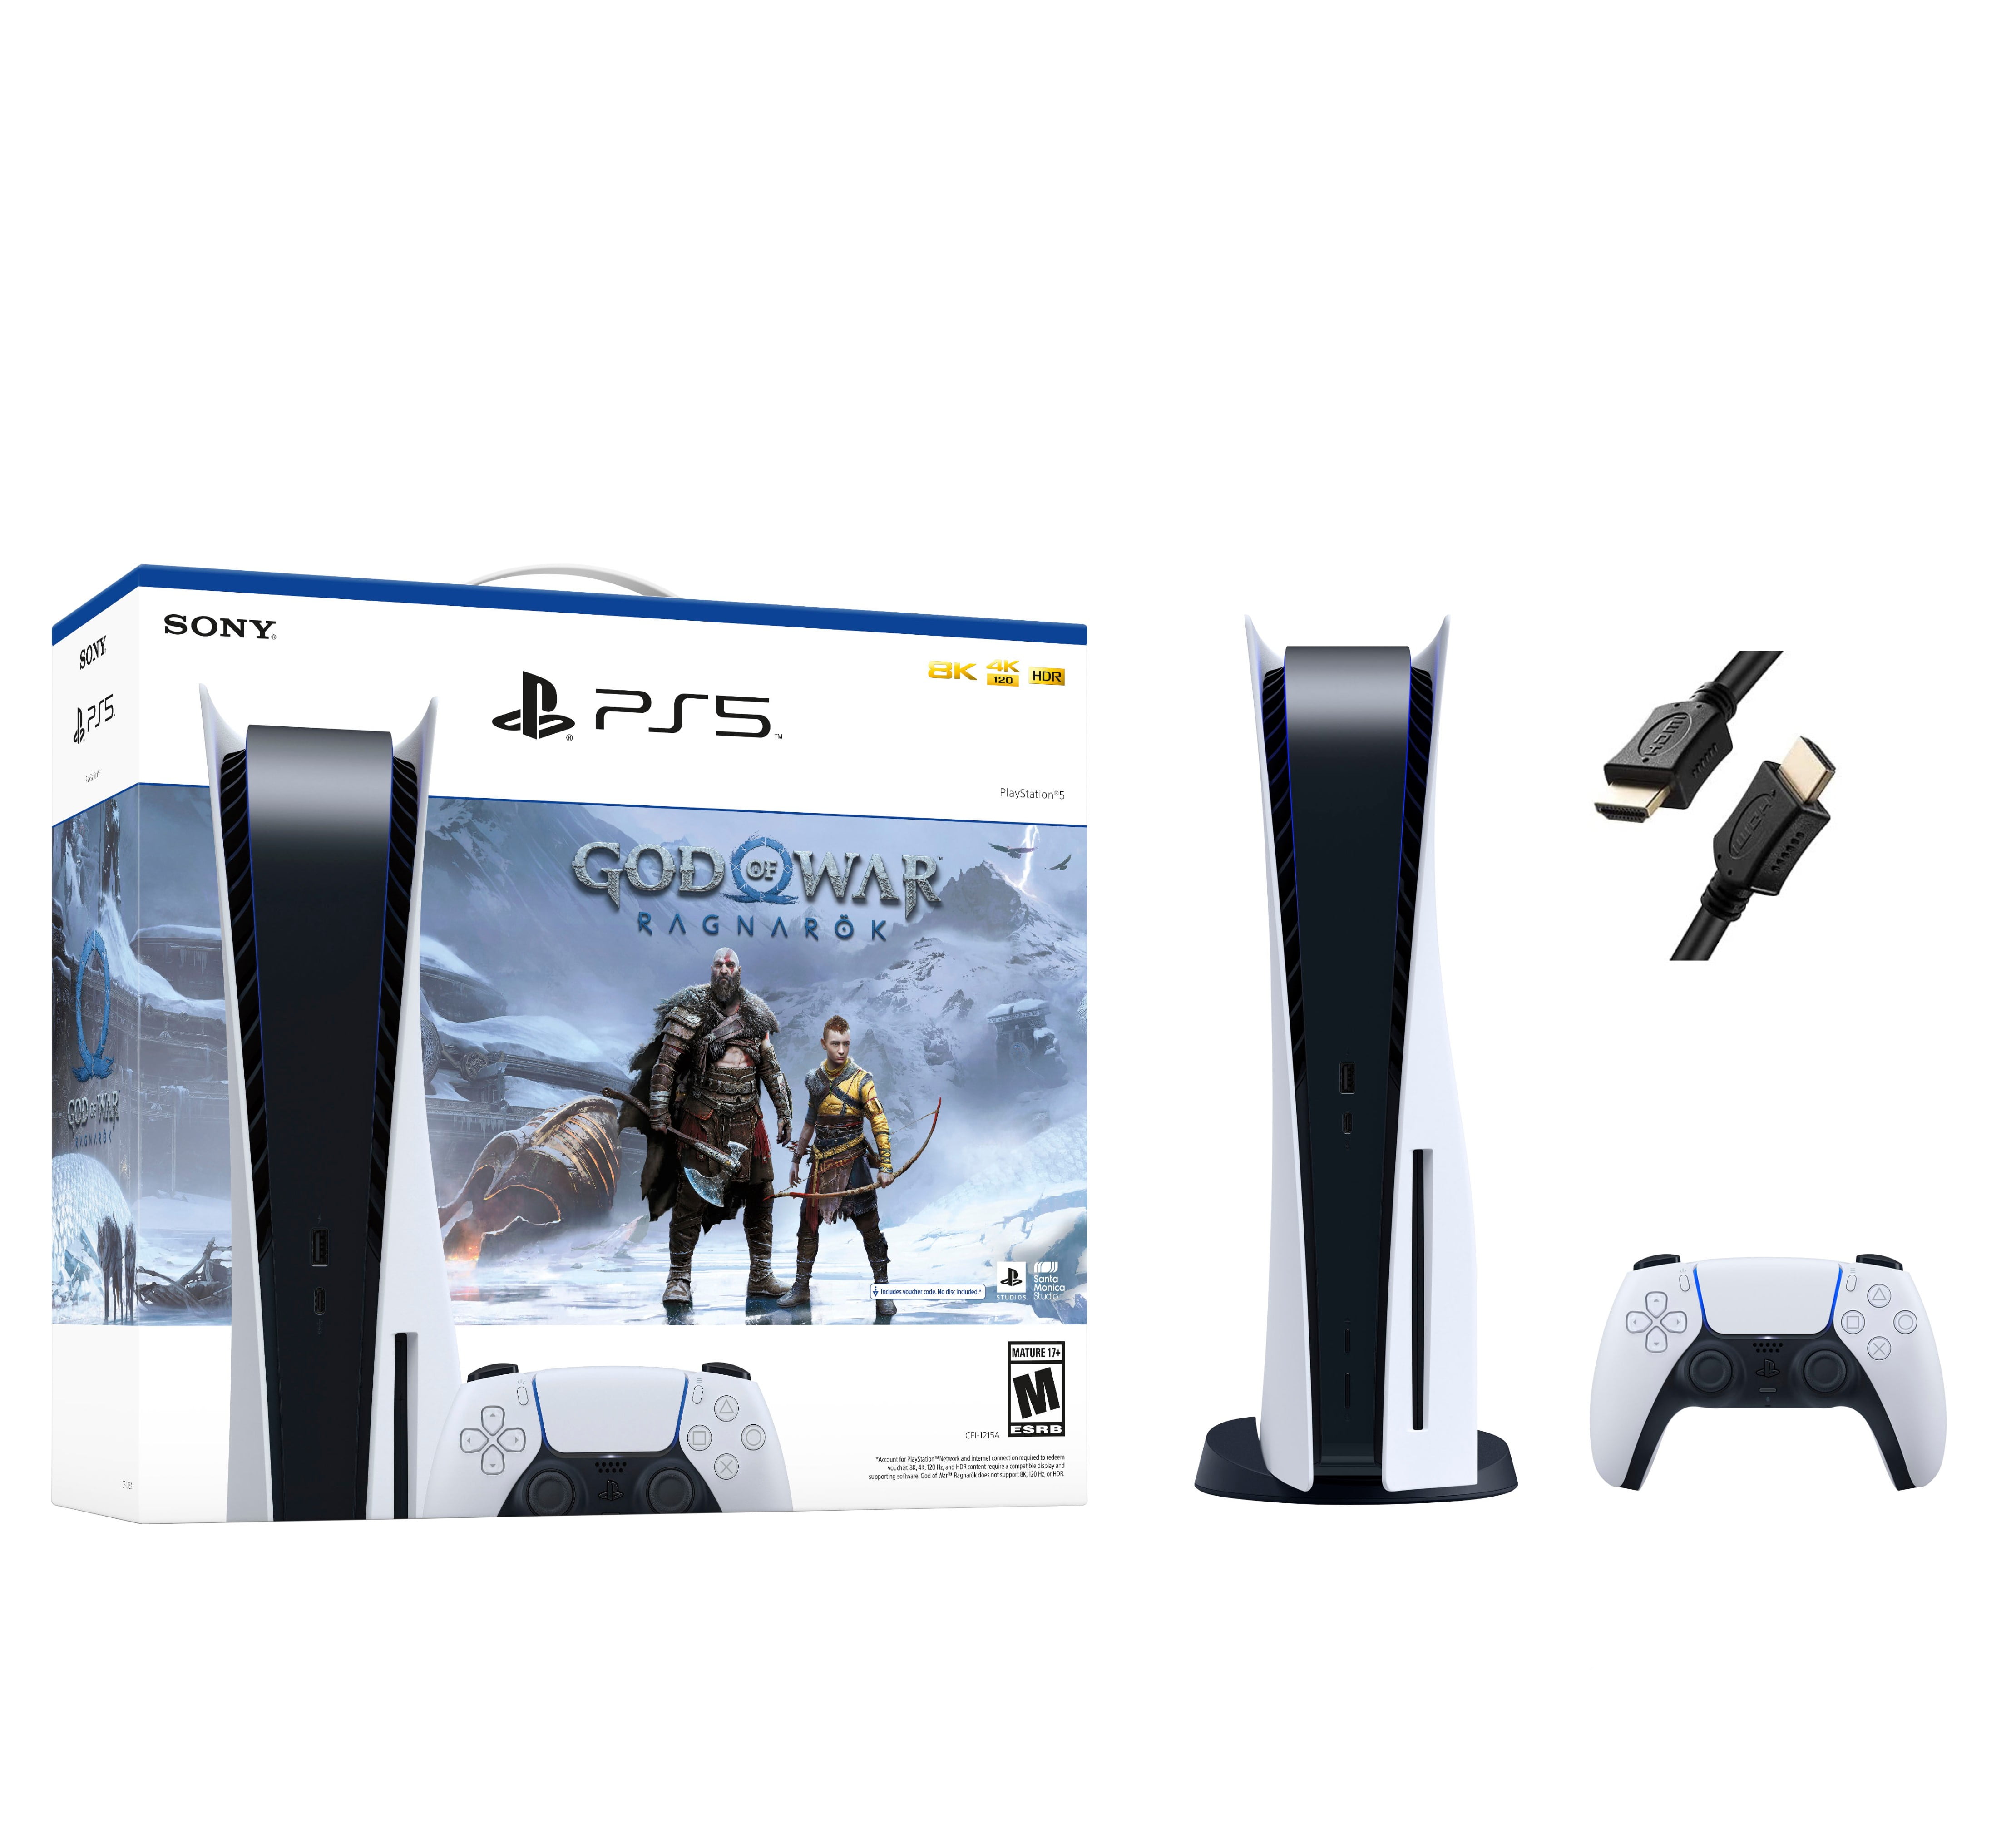 This PS4 bundle comes with 3 must-play games *and* a PS Store gift card